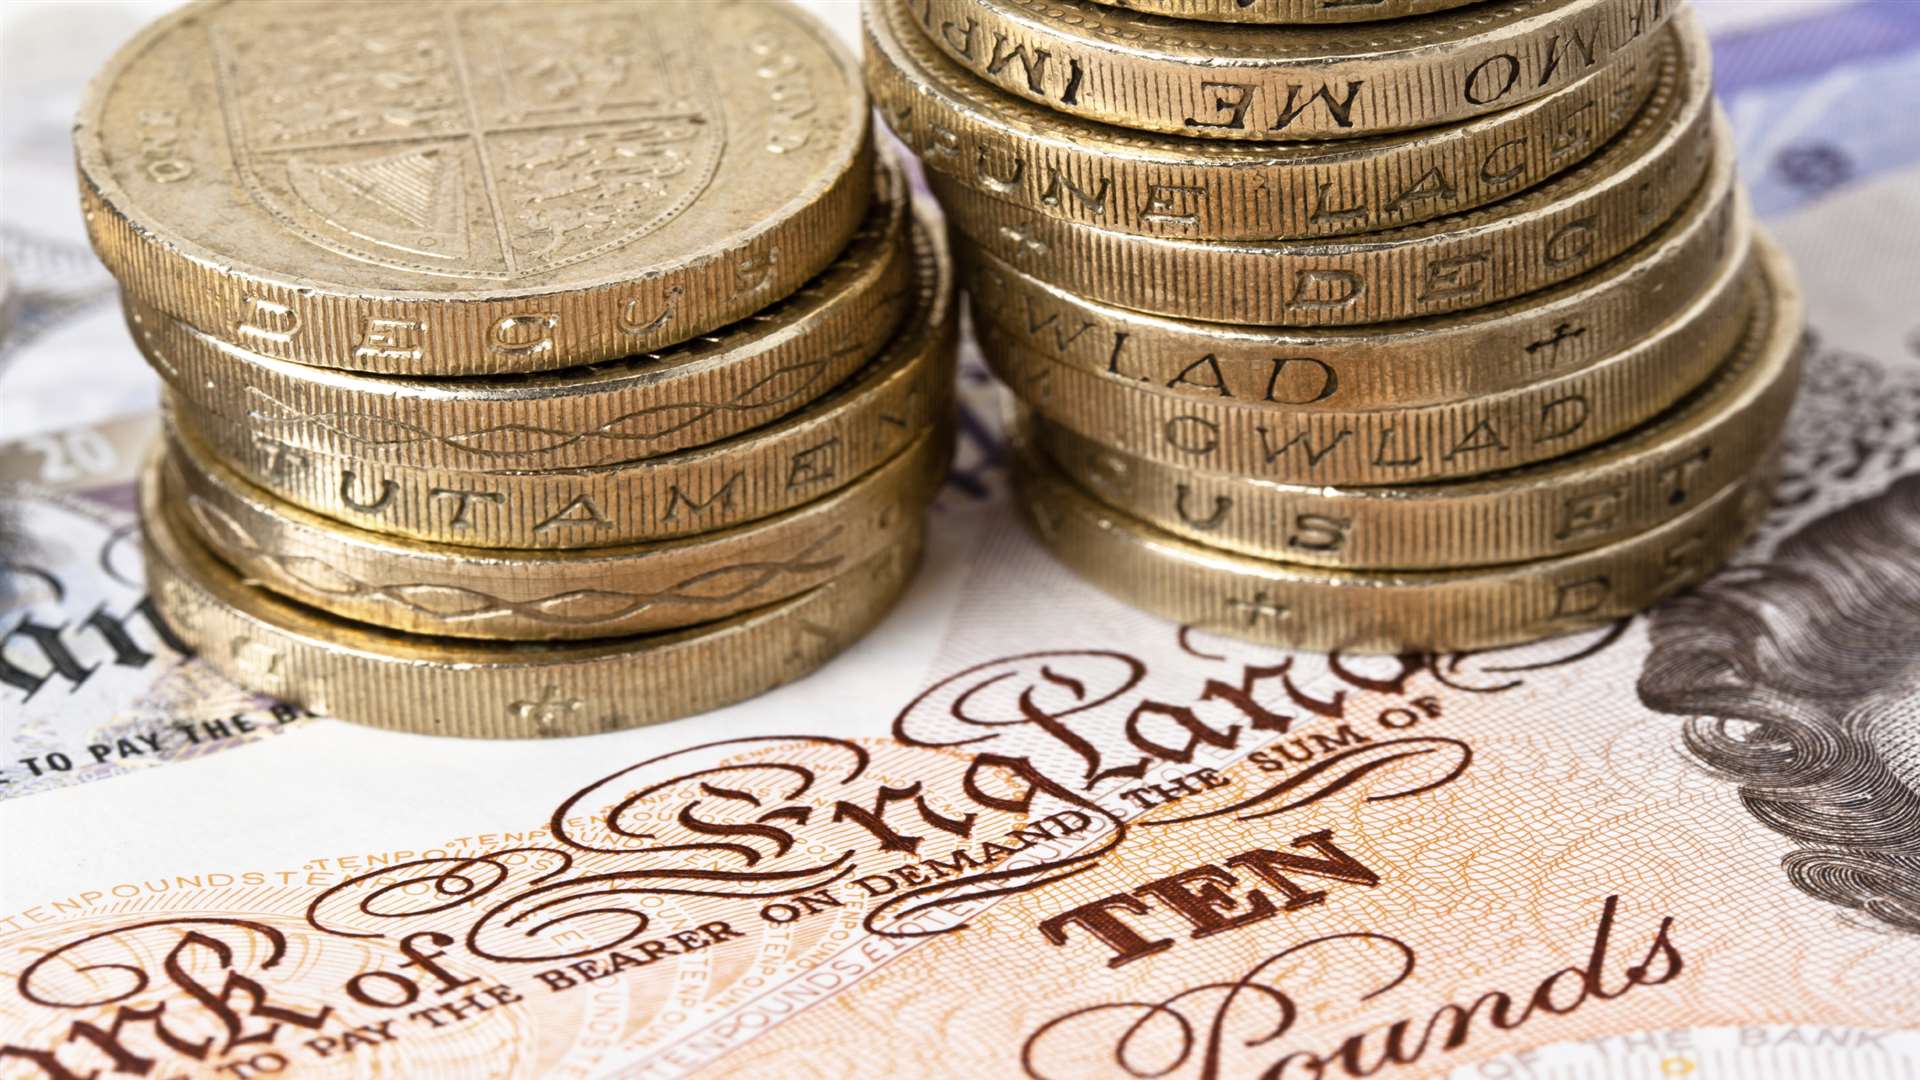 It's said banks want to lend money again. Picture: www.istockphoto.com